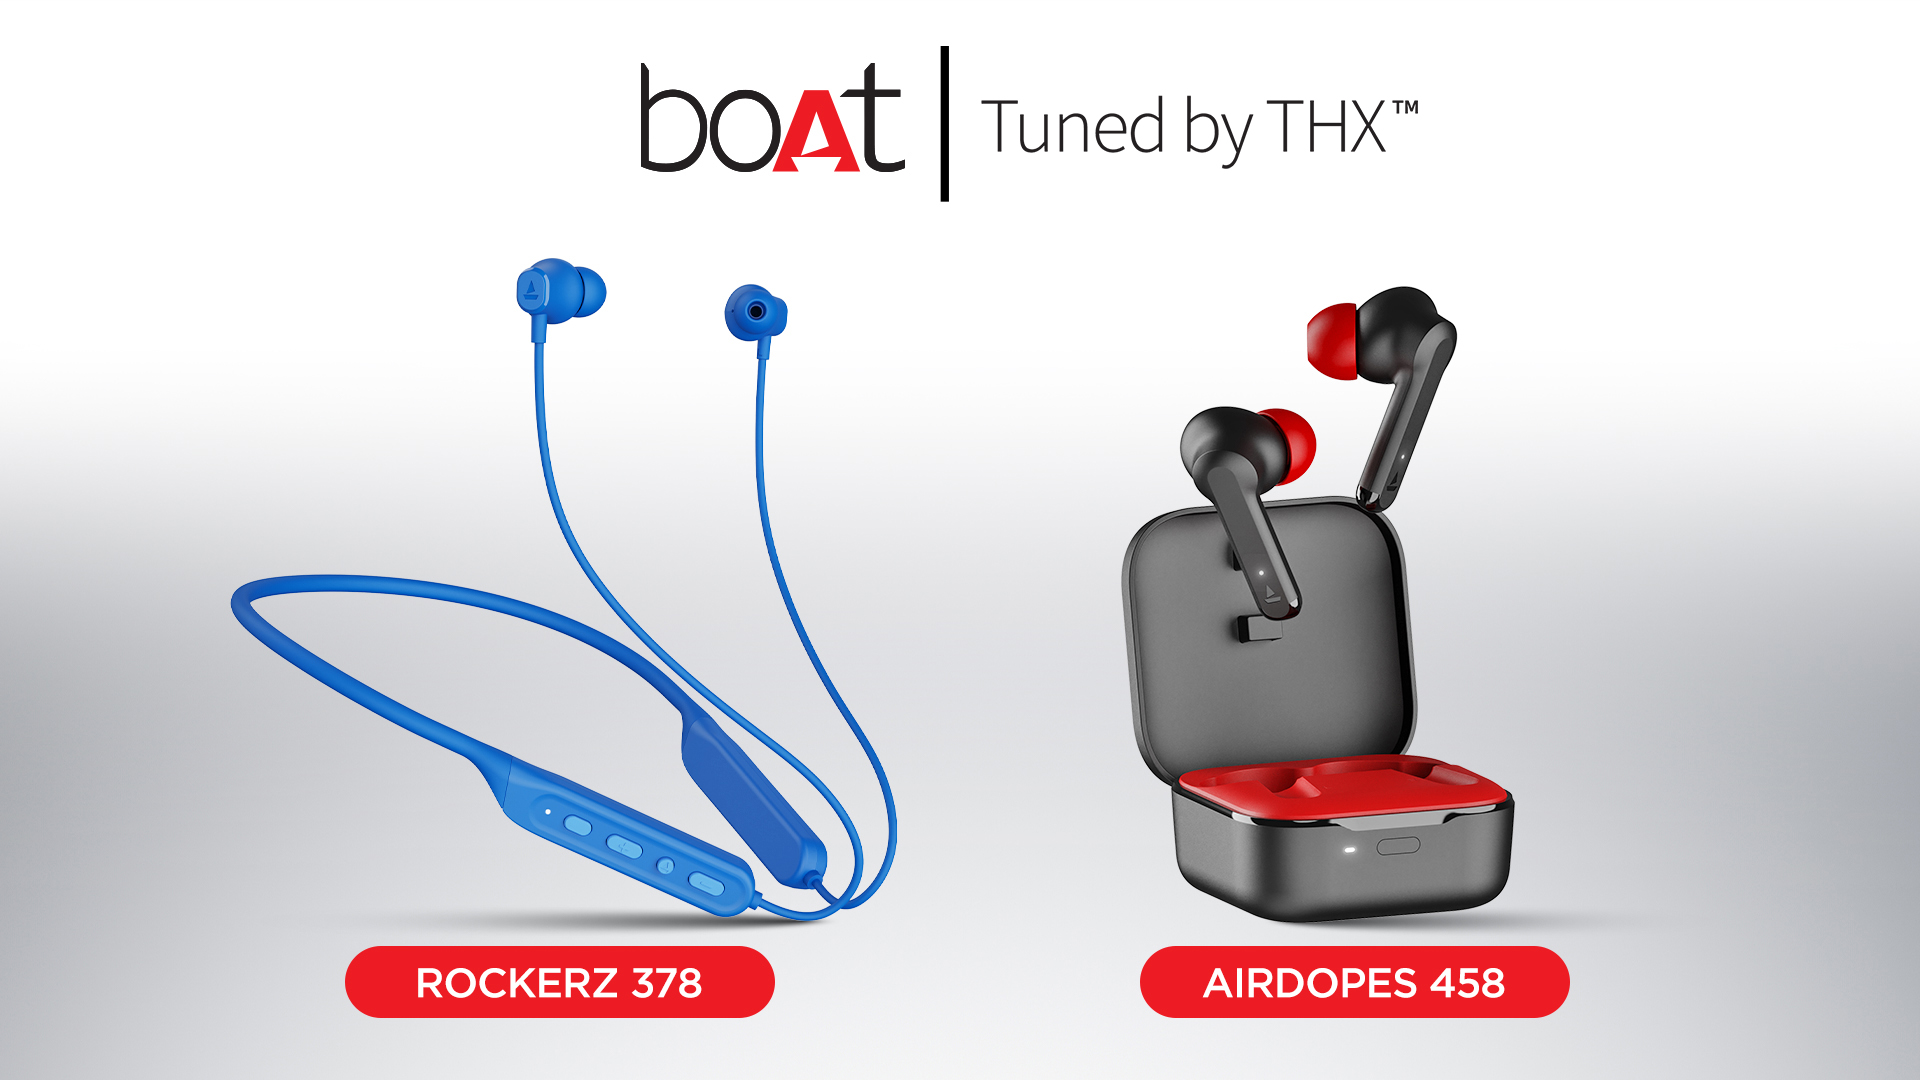 Tuned by THX boAt next-gen earbuds and headphones